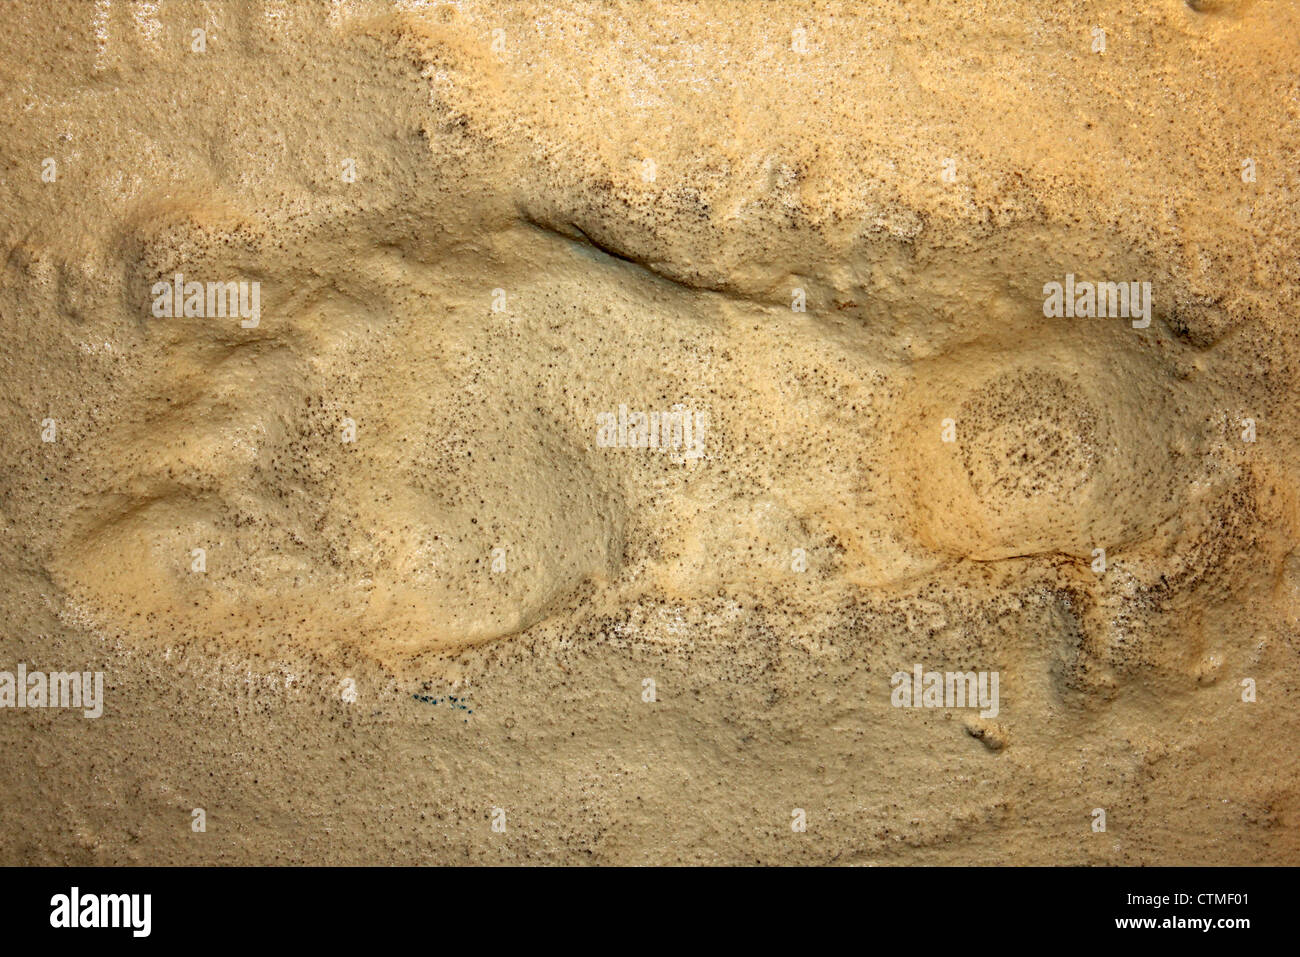 Cast Of A Human Footprint Found In Holocene Sediments At Formby, Merseyside, UK Stock Photo